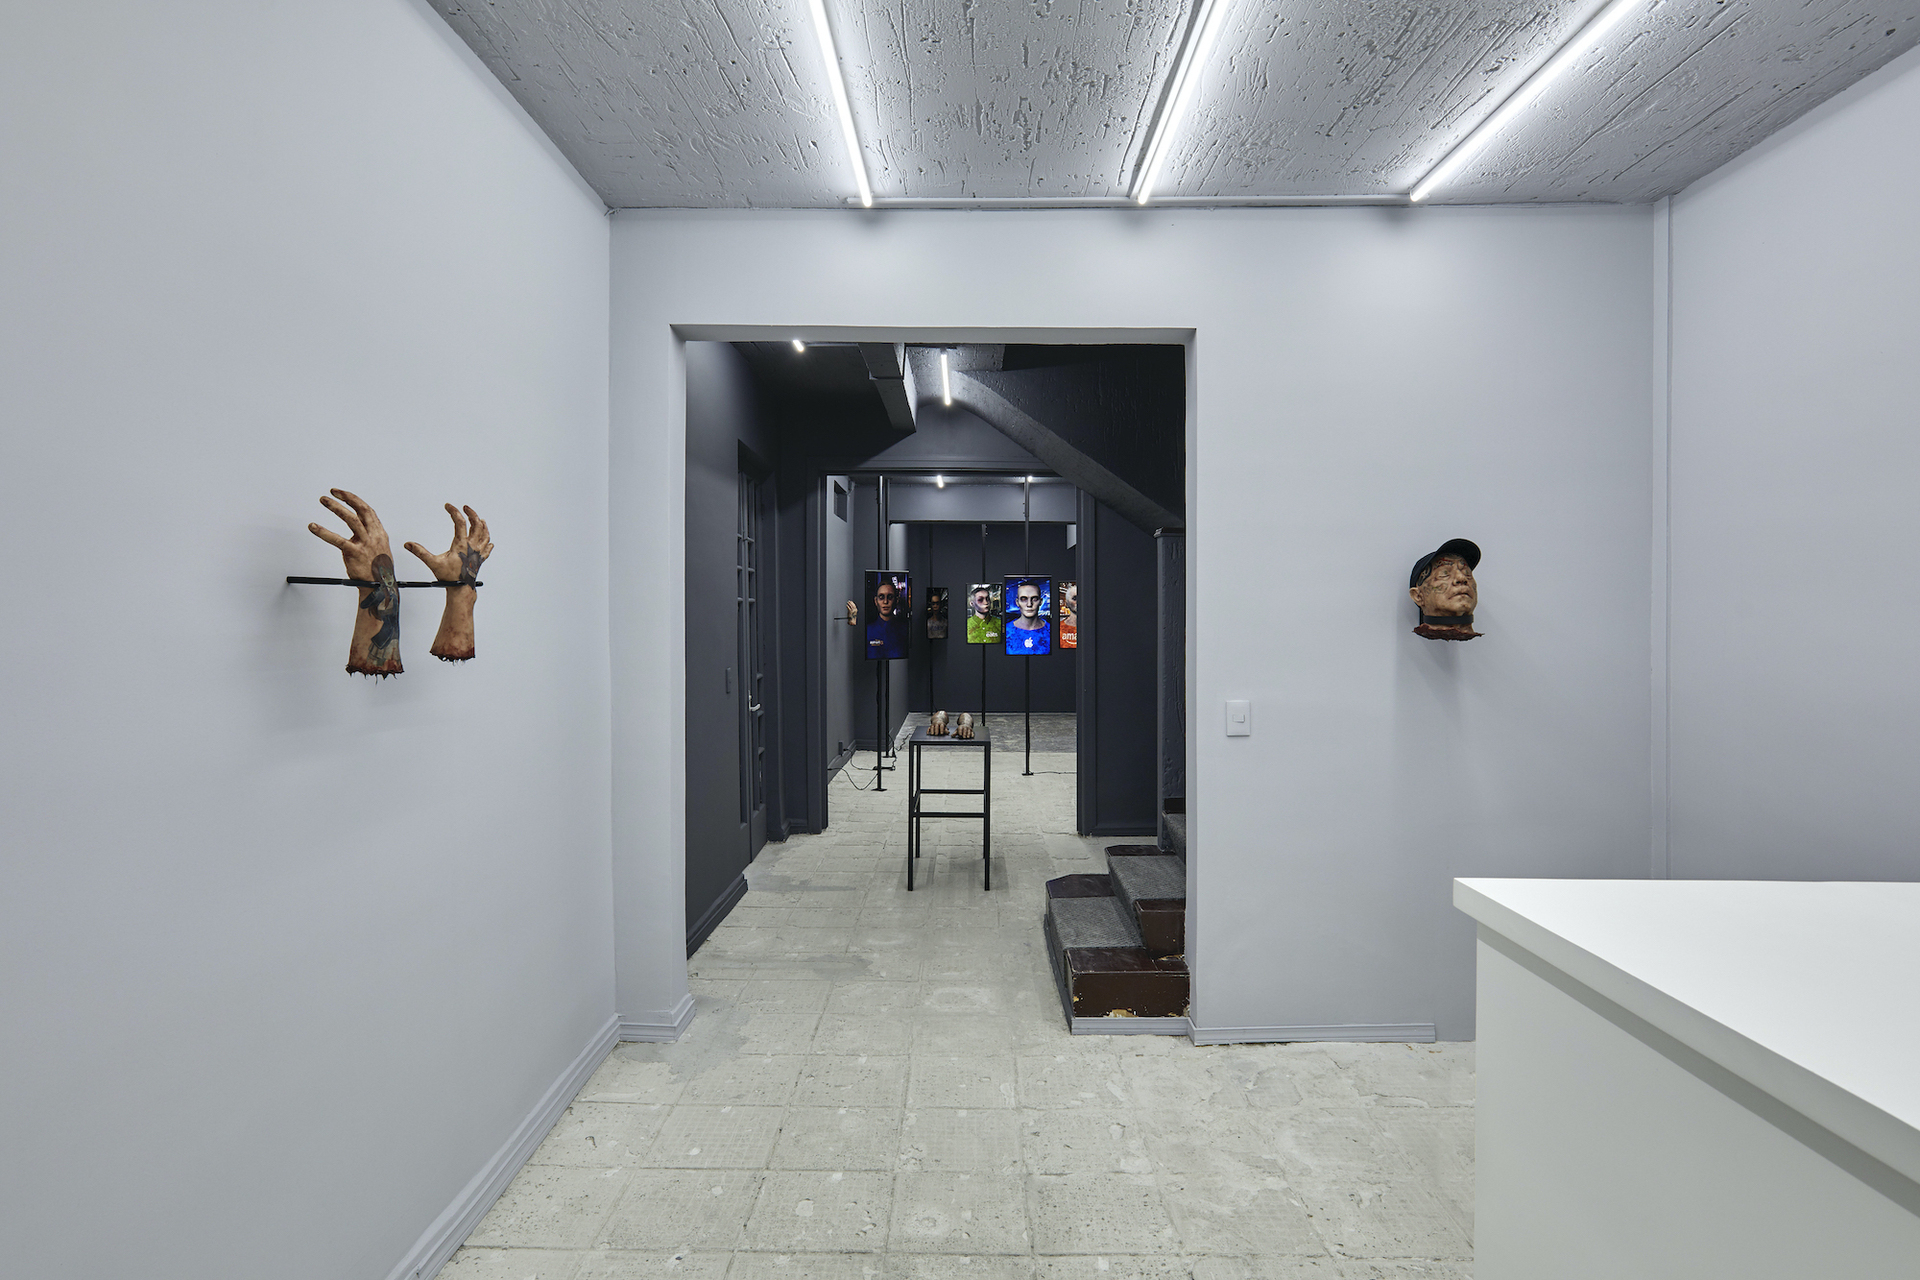 Installation view at Pequod Co., Mexico City, 2020